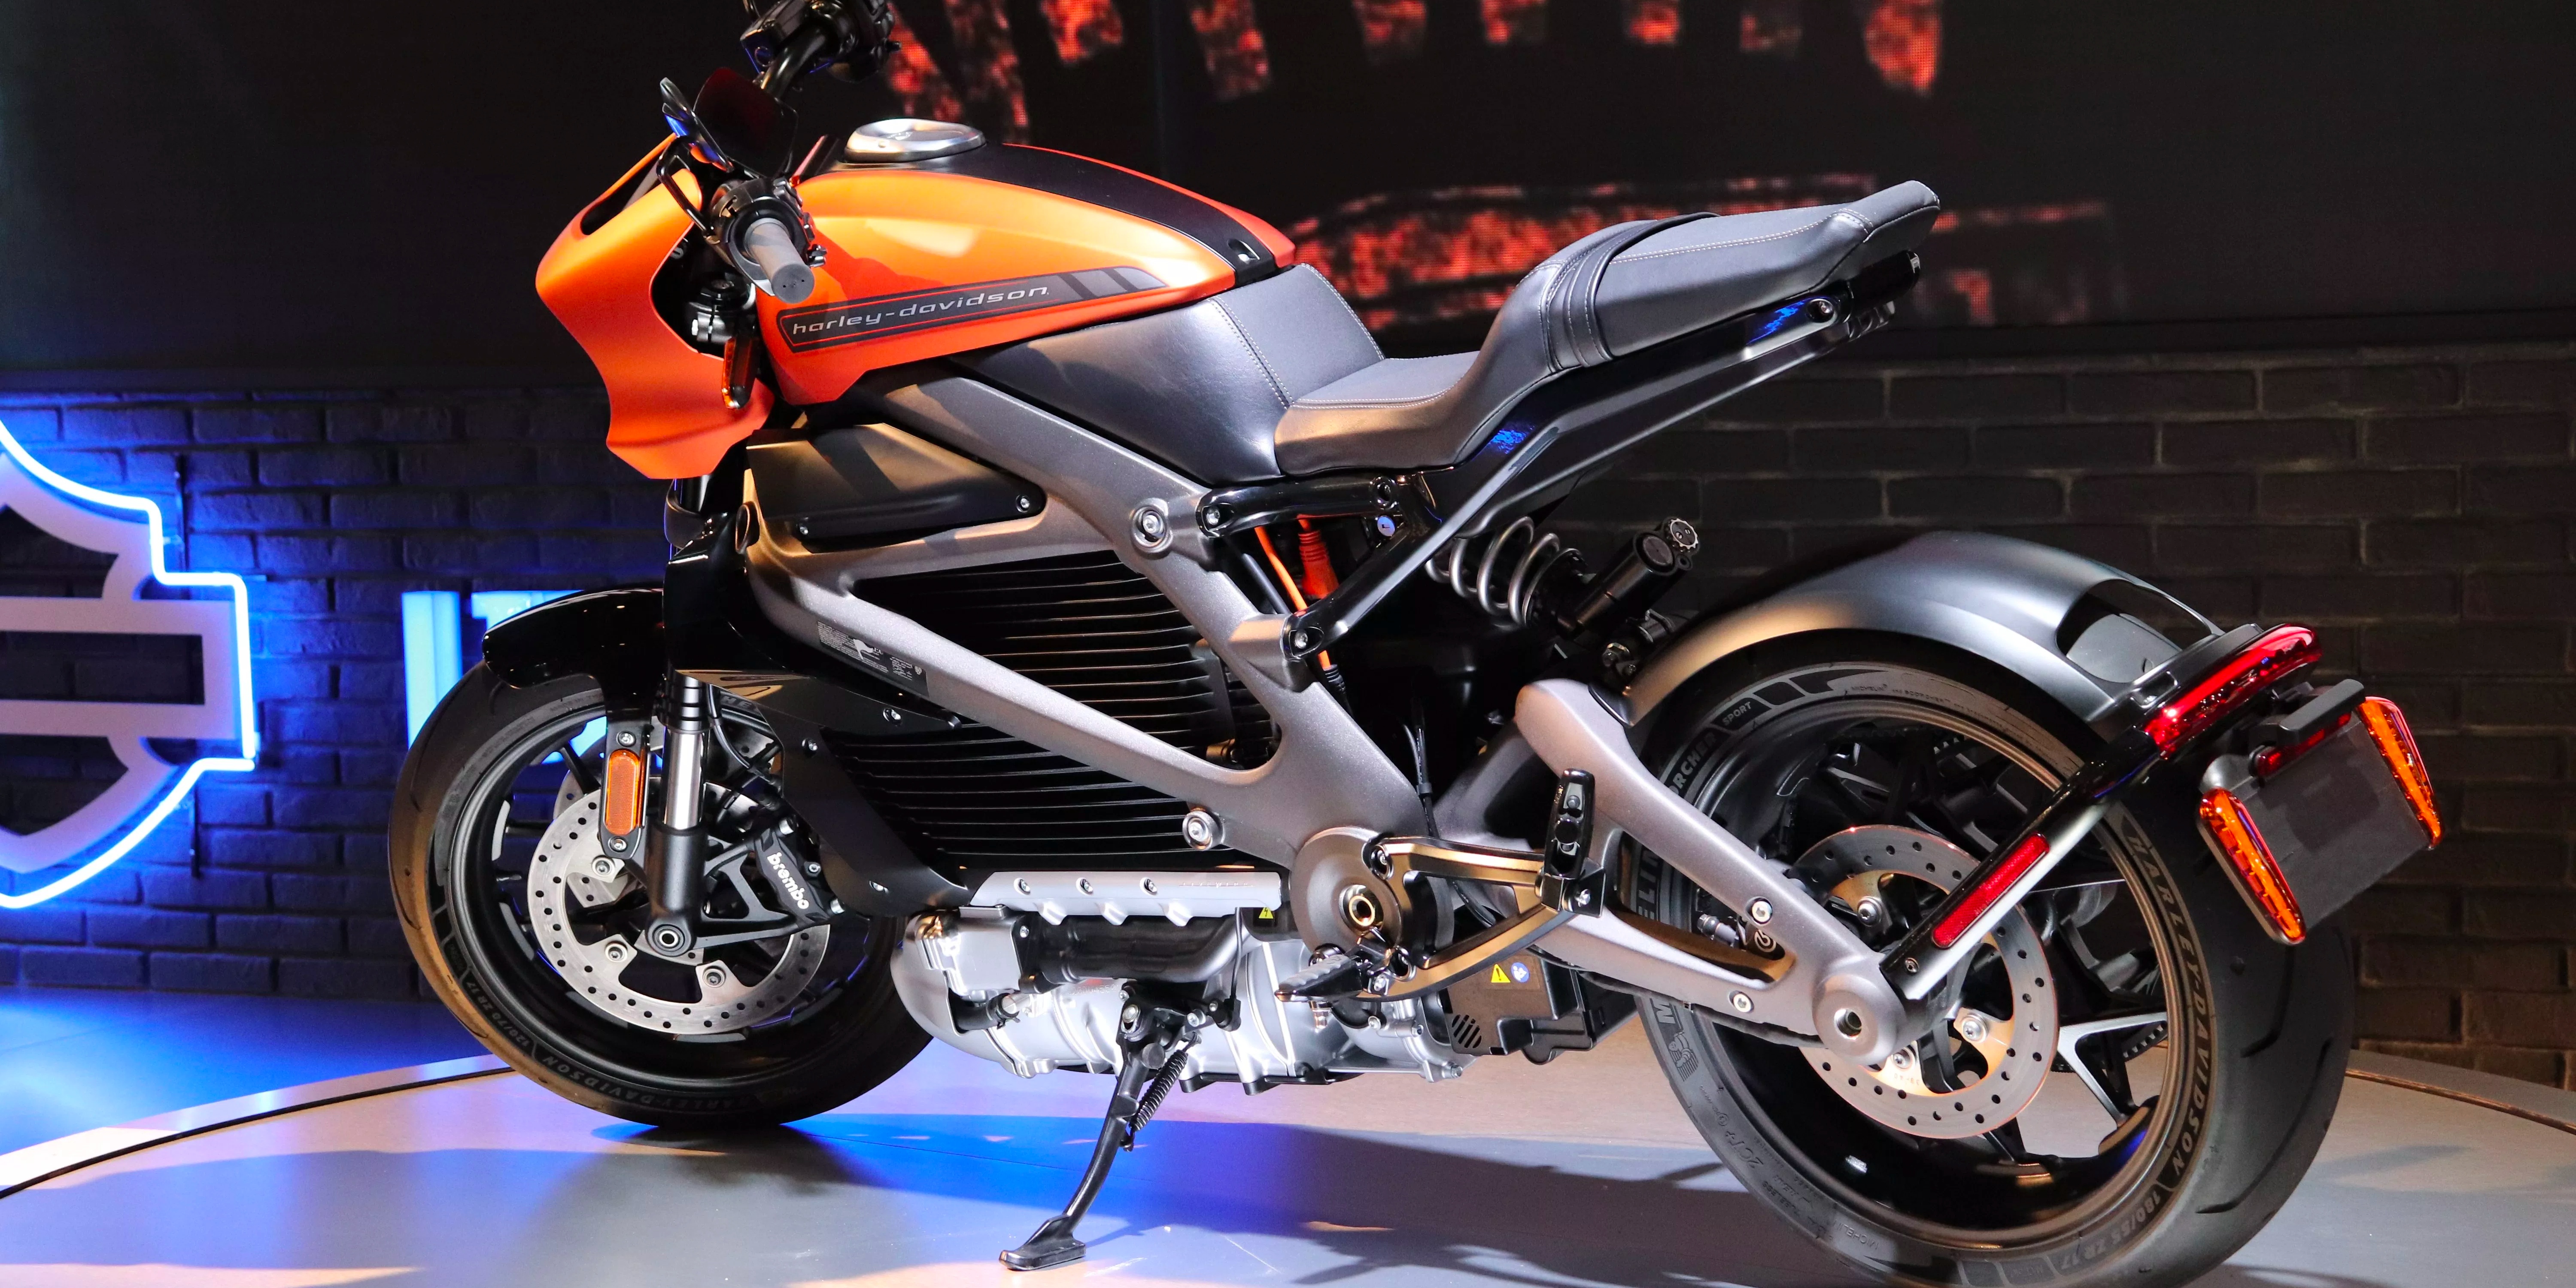 Harley-Davidson unveils Livewire specs and prices, shows off 3 new urban electric motorbikes